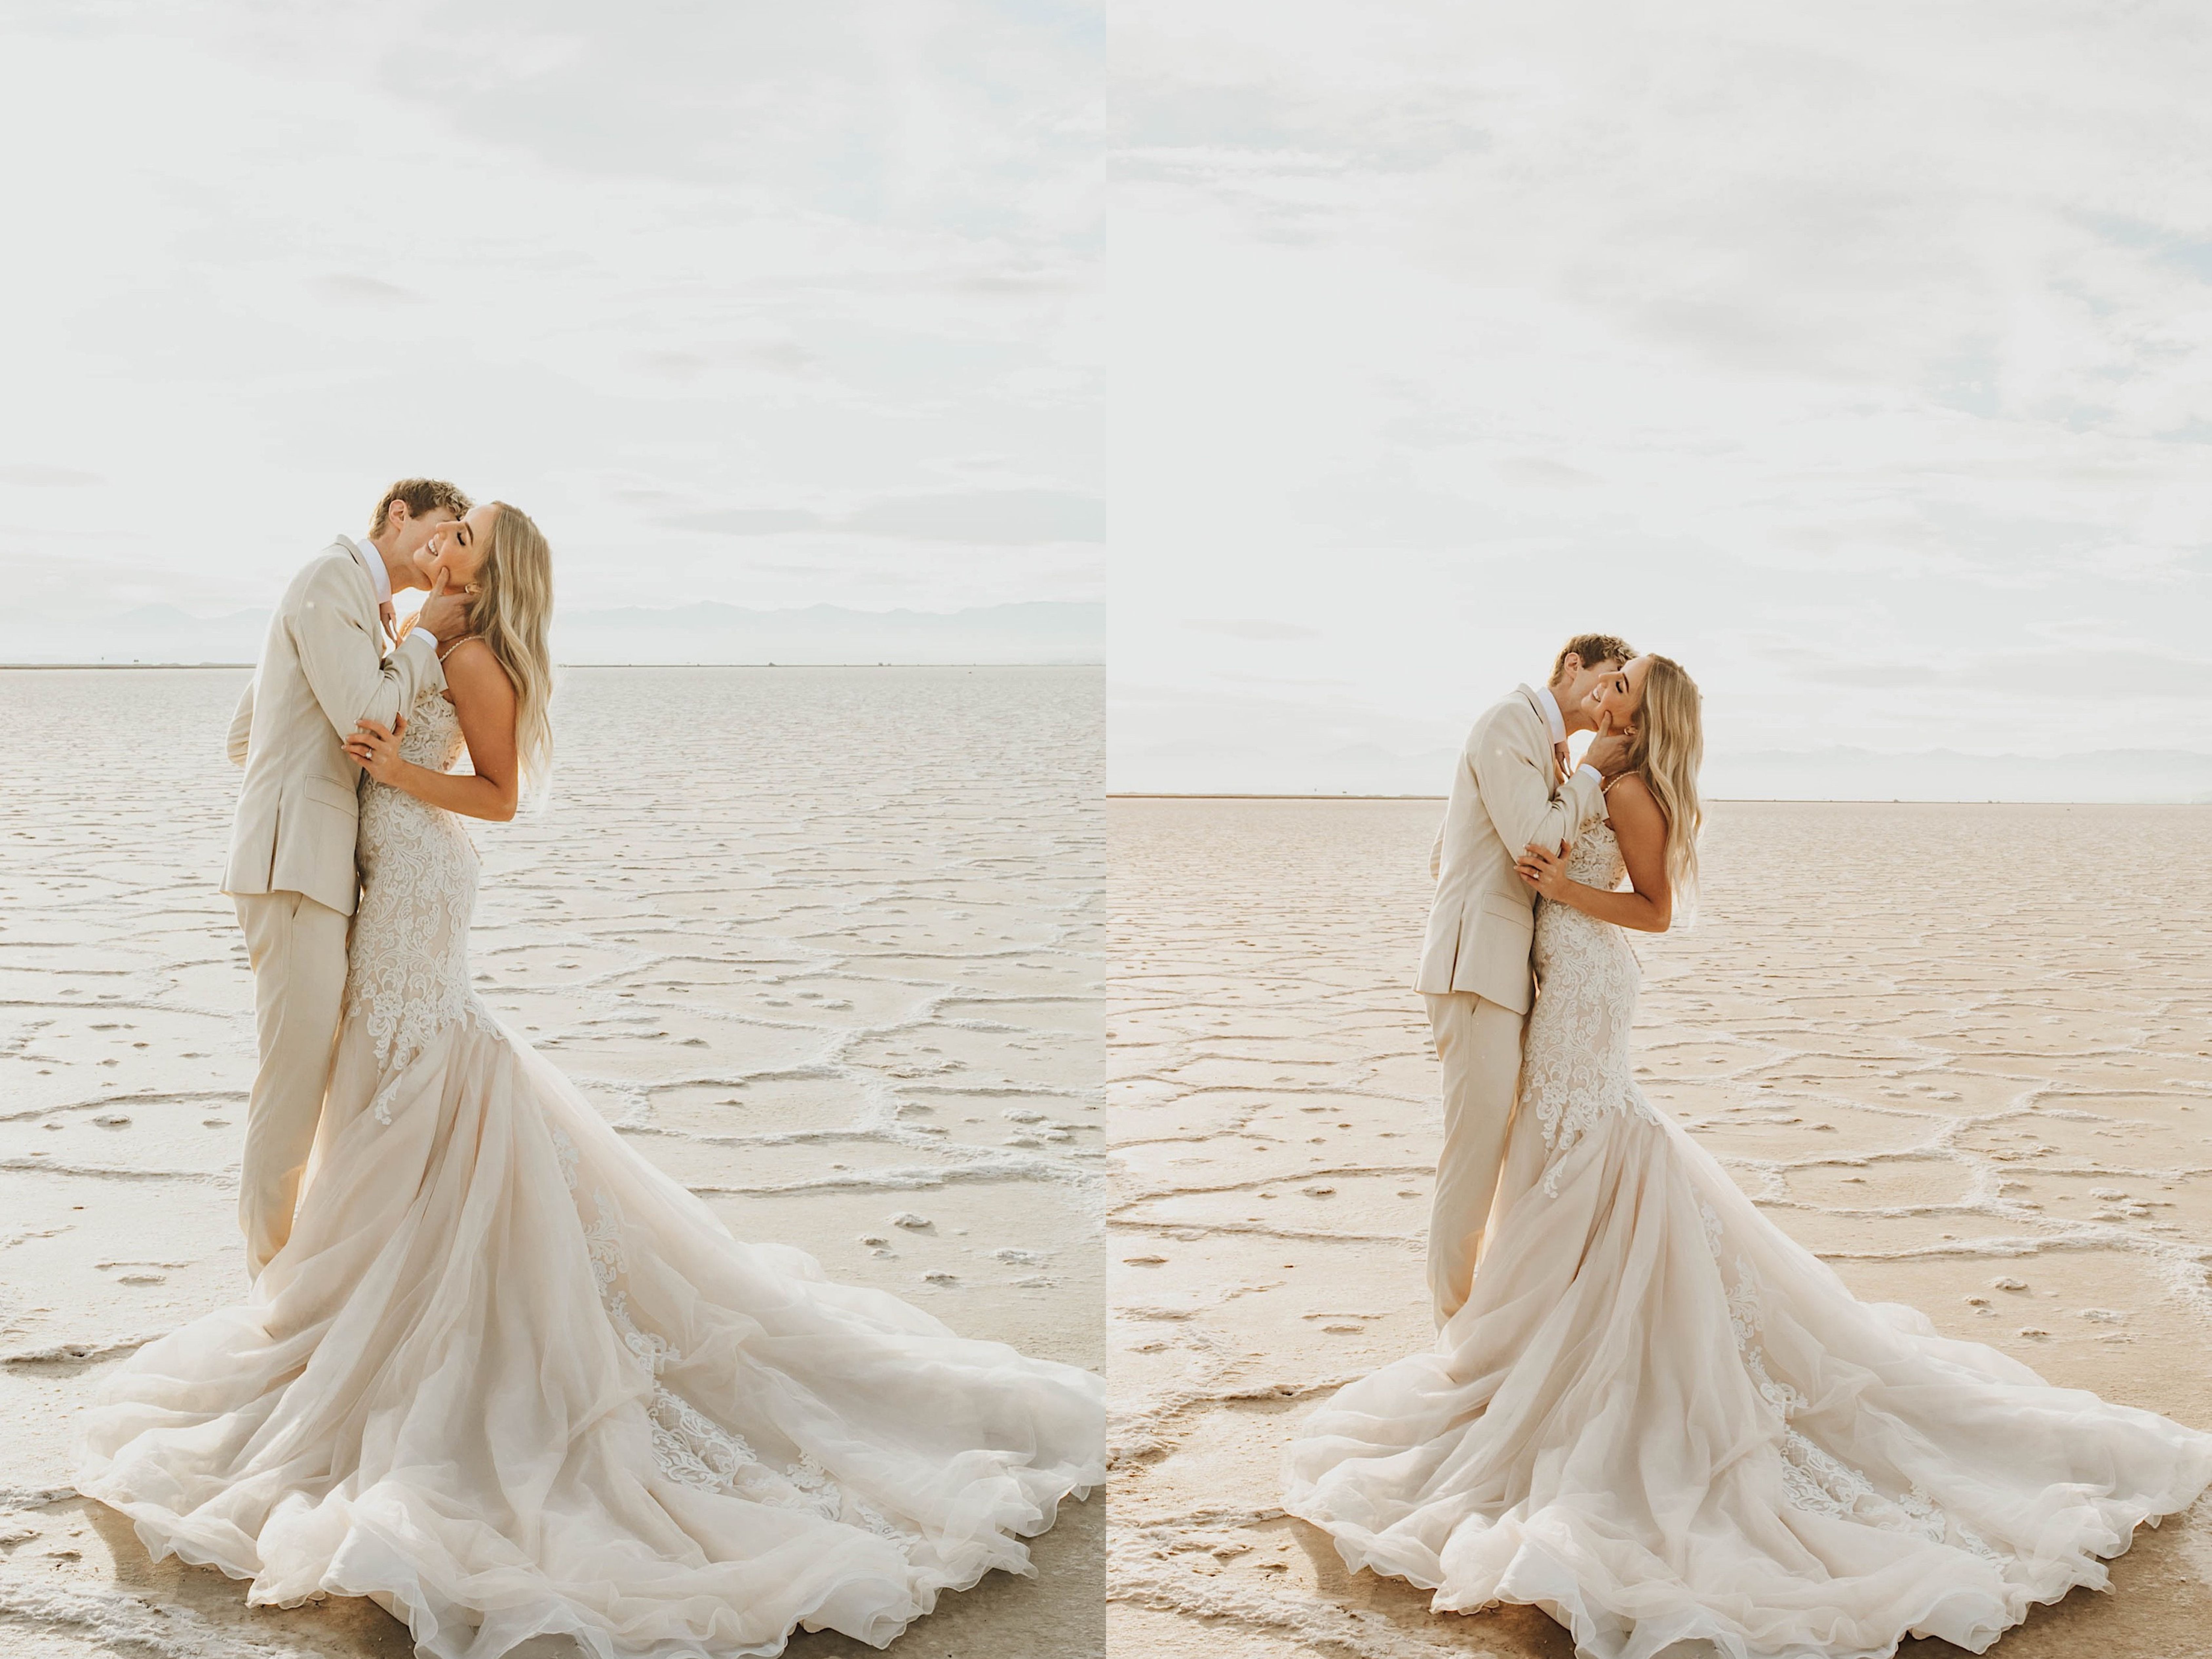 2 photos side by side of a bride smiling as she is kissed on the neck by the groom while they stand in the Utah Salt Flats